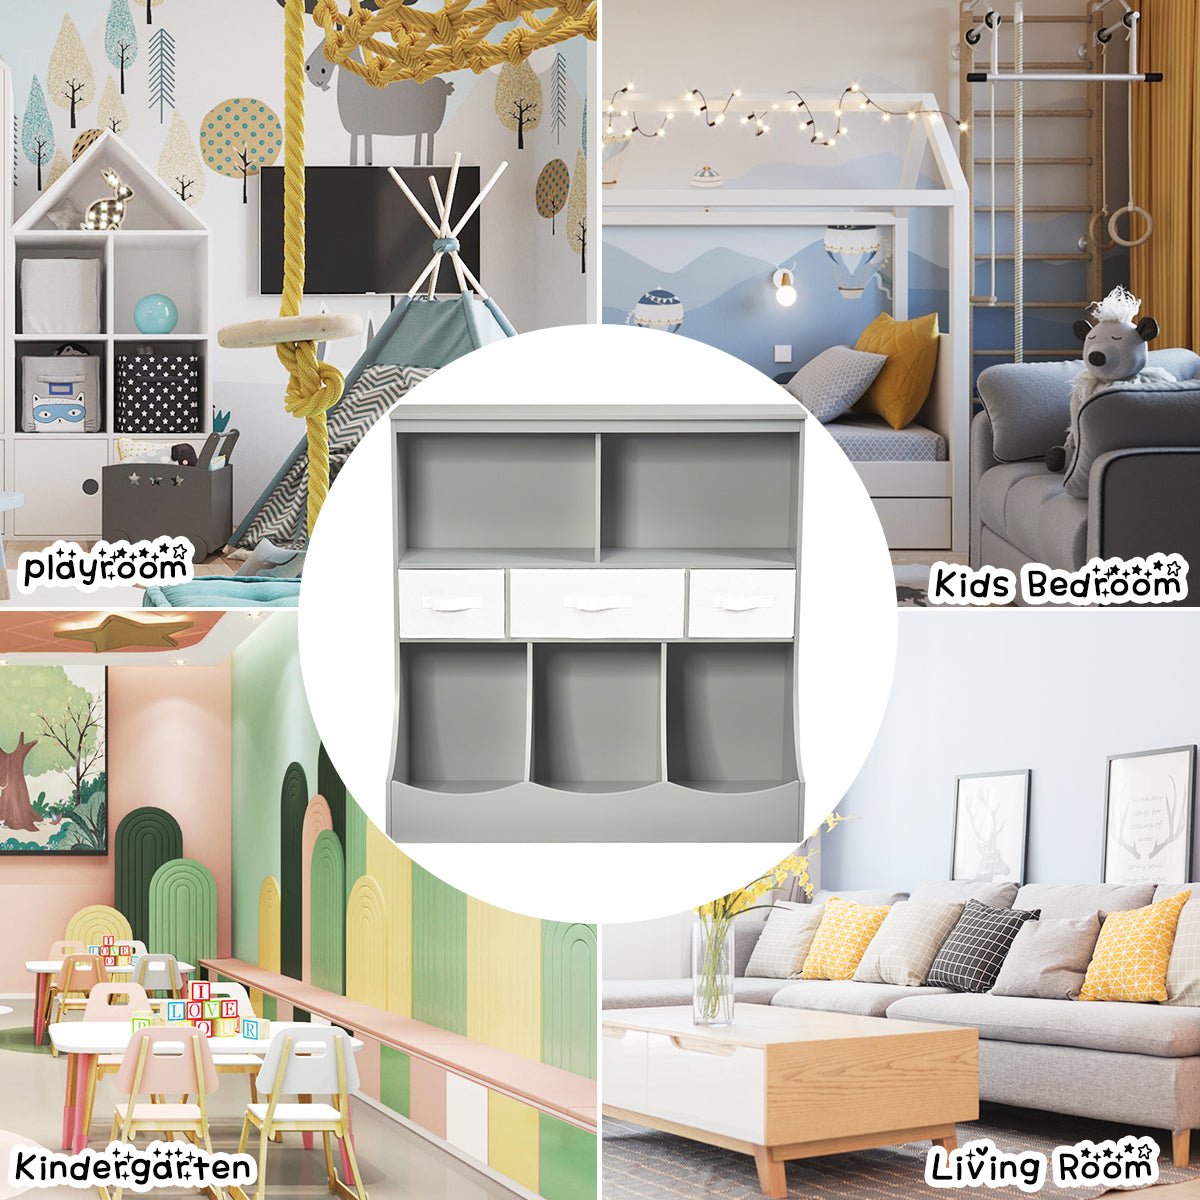 13-Layer Cubby Bin Combo - Neat Grey & White Storage for Kids Room